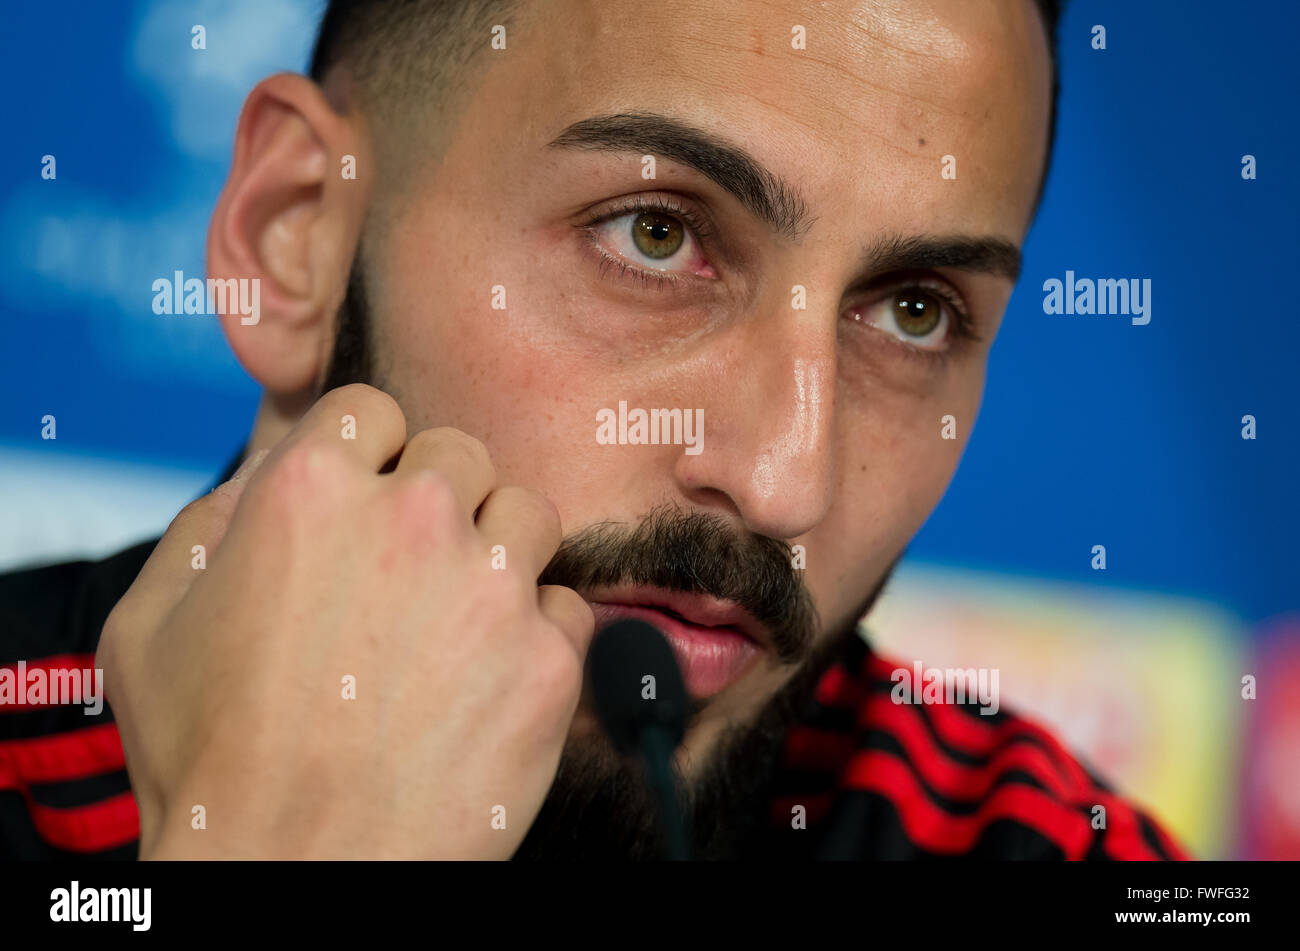 Munich, Germany. 4th Apr, 2016. Lisbon's Kostas Mitroglou speaks during a press conference at the Allianz Arena soccer stadium in Munich, Germany, 4 April 2016. The Benfica Lissabon is going to play against FC Bayern Munich in the Champions League quarter final soccer match on 5 April 2016. Photo: Sven Hoppe/dpa/Alamy Live News Stock Photo